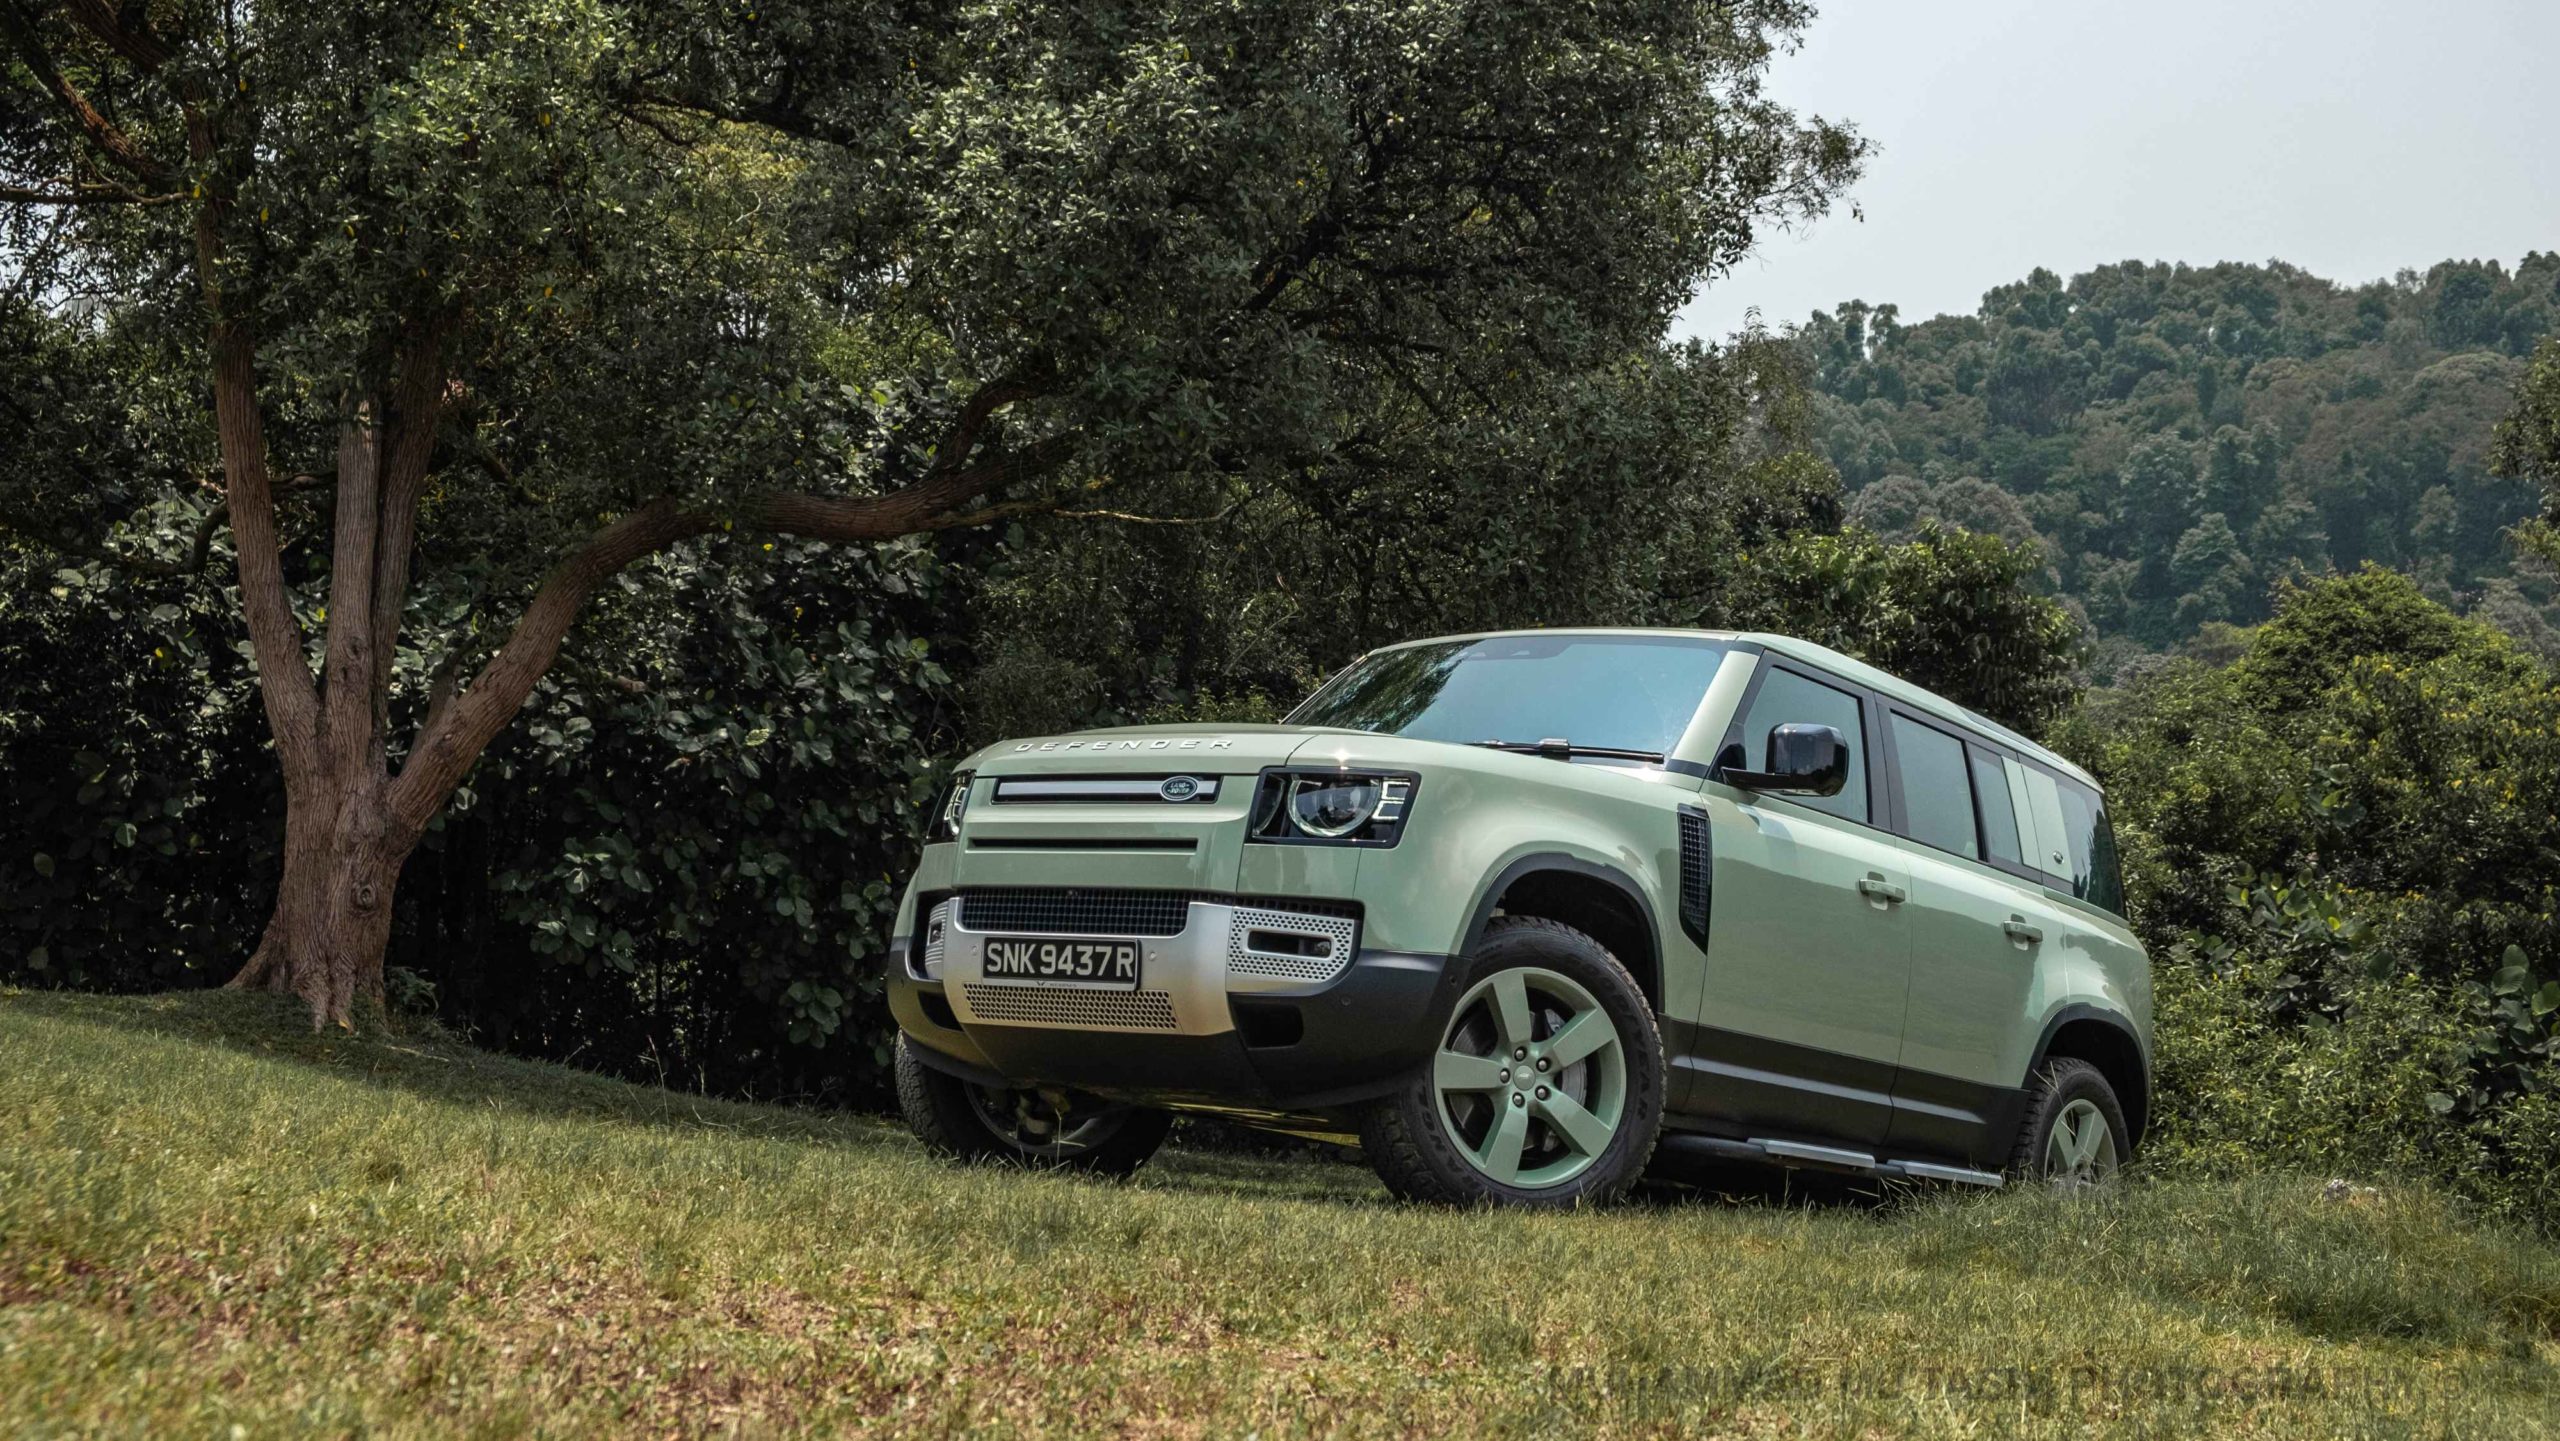 mreview: land rover defender 110 75th anniversary limited edition – high-def high-rider